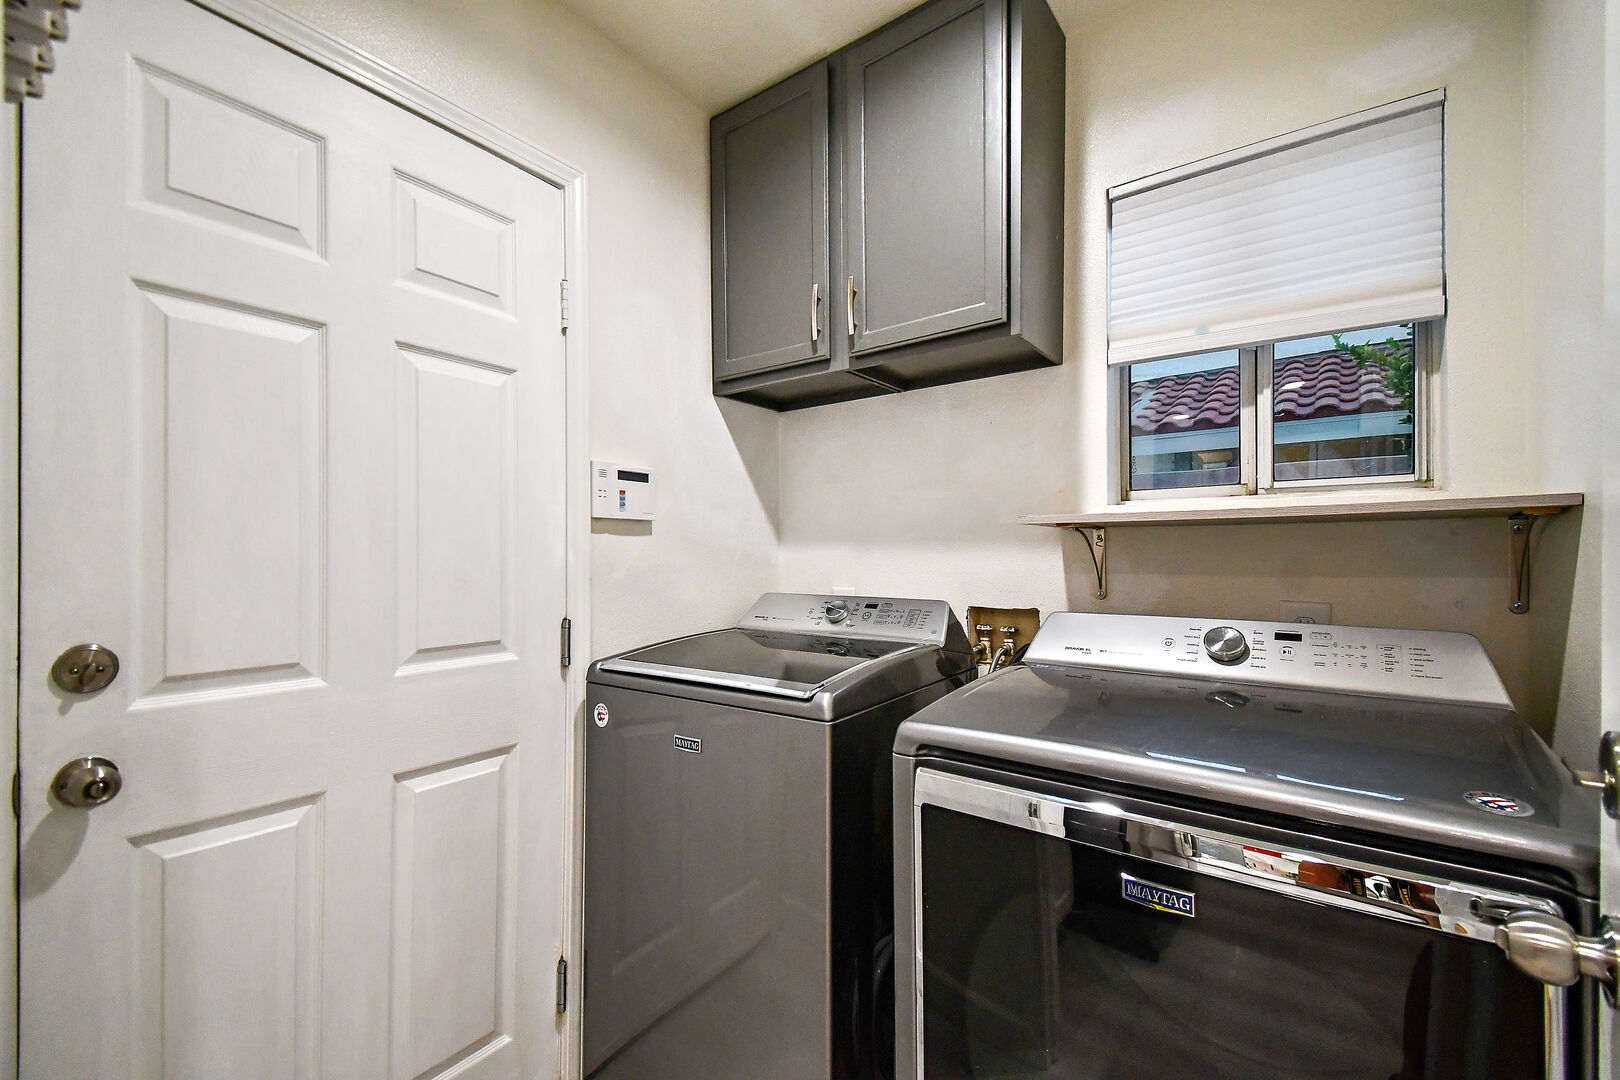 The fully equipped laundry room features a washer, dryer, iron, ironing board, and laundry pods.